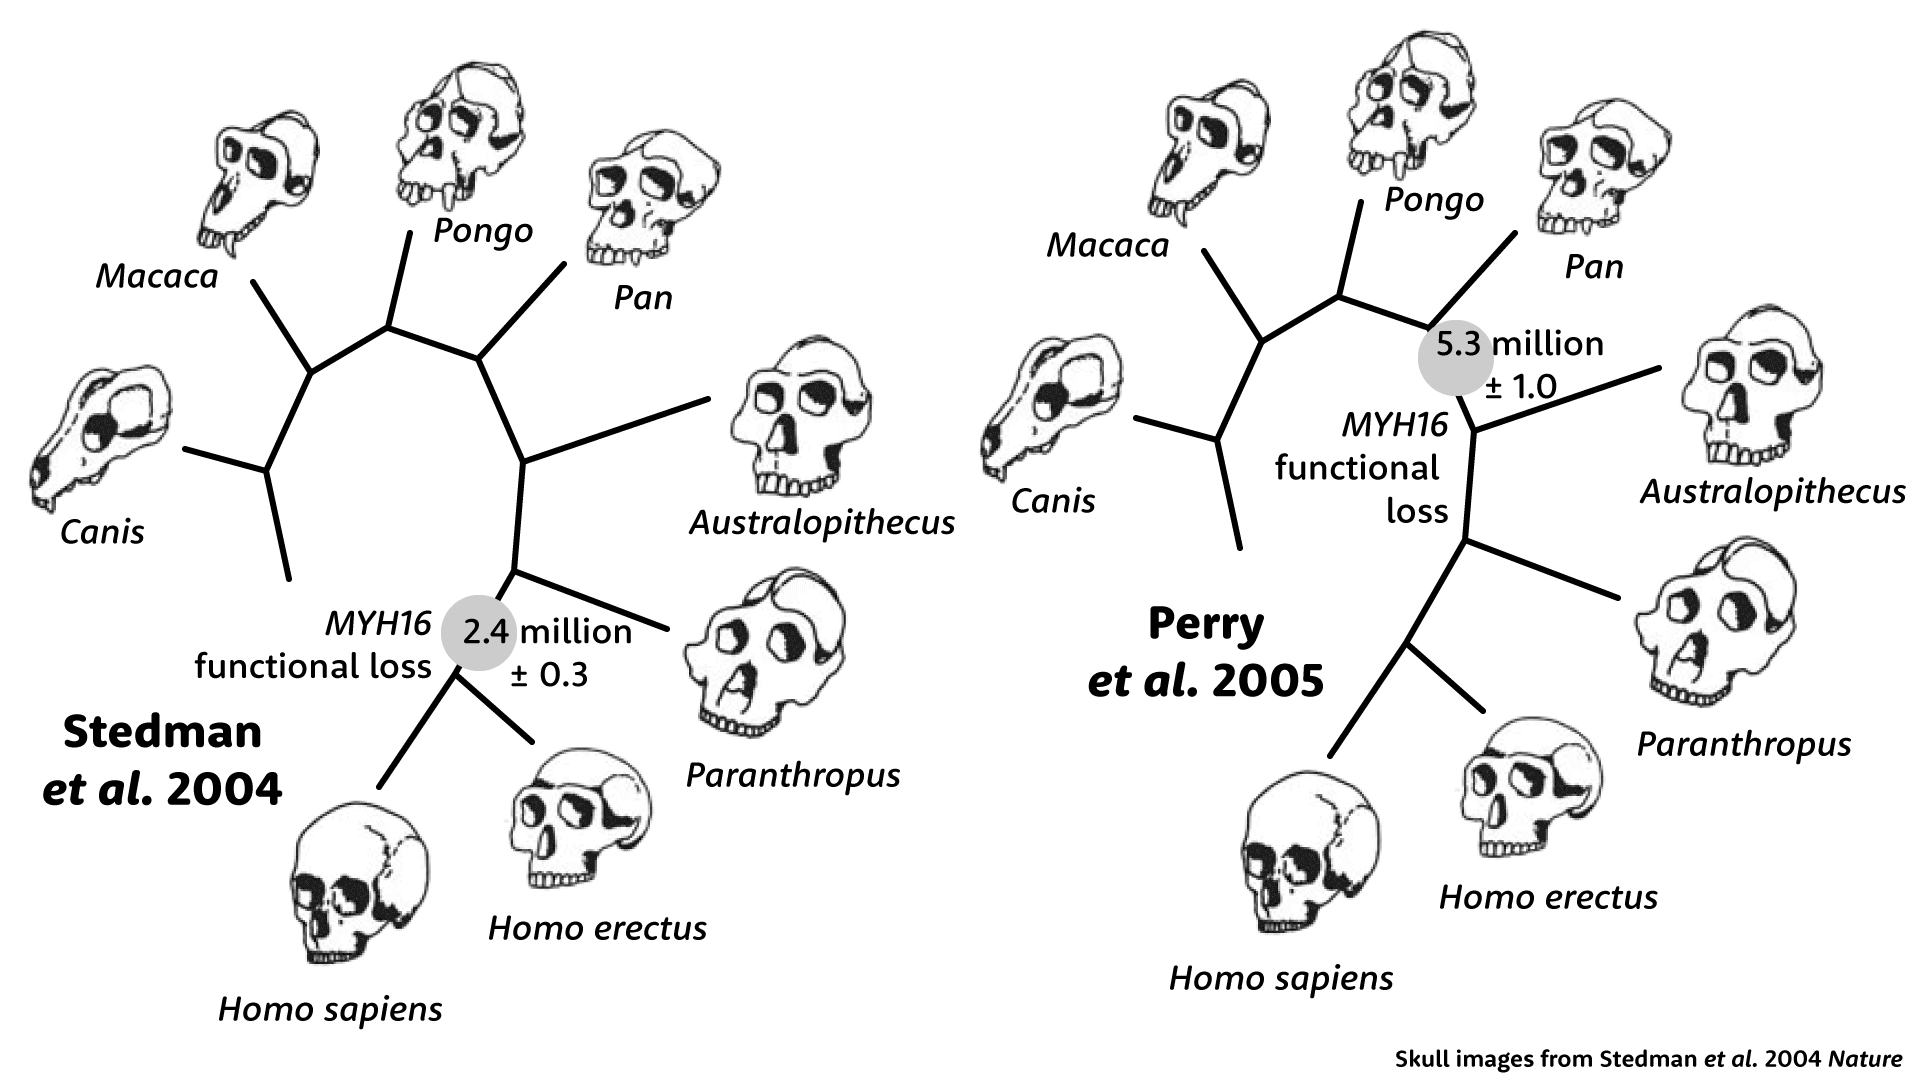 Tree of relationship of Canis, Macaca, Pongo, Pan, Australopithecus, Paranthropus, Homo erectus, and Homo sapiens under the two models of MYH16 evolution